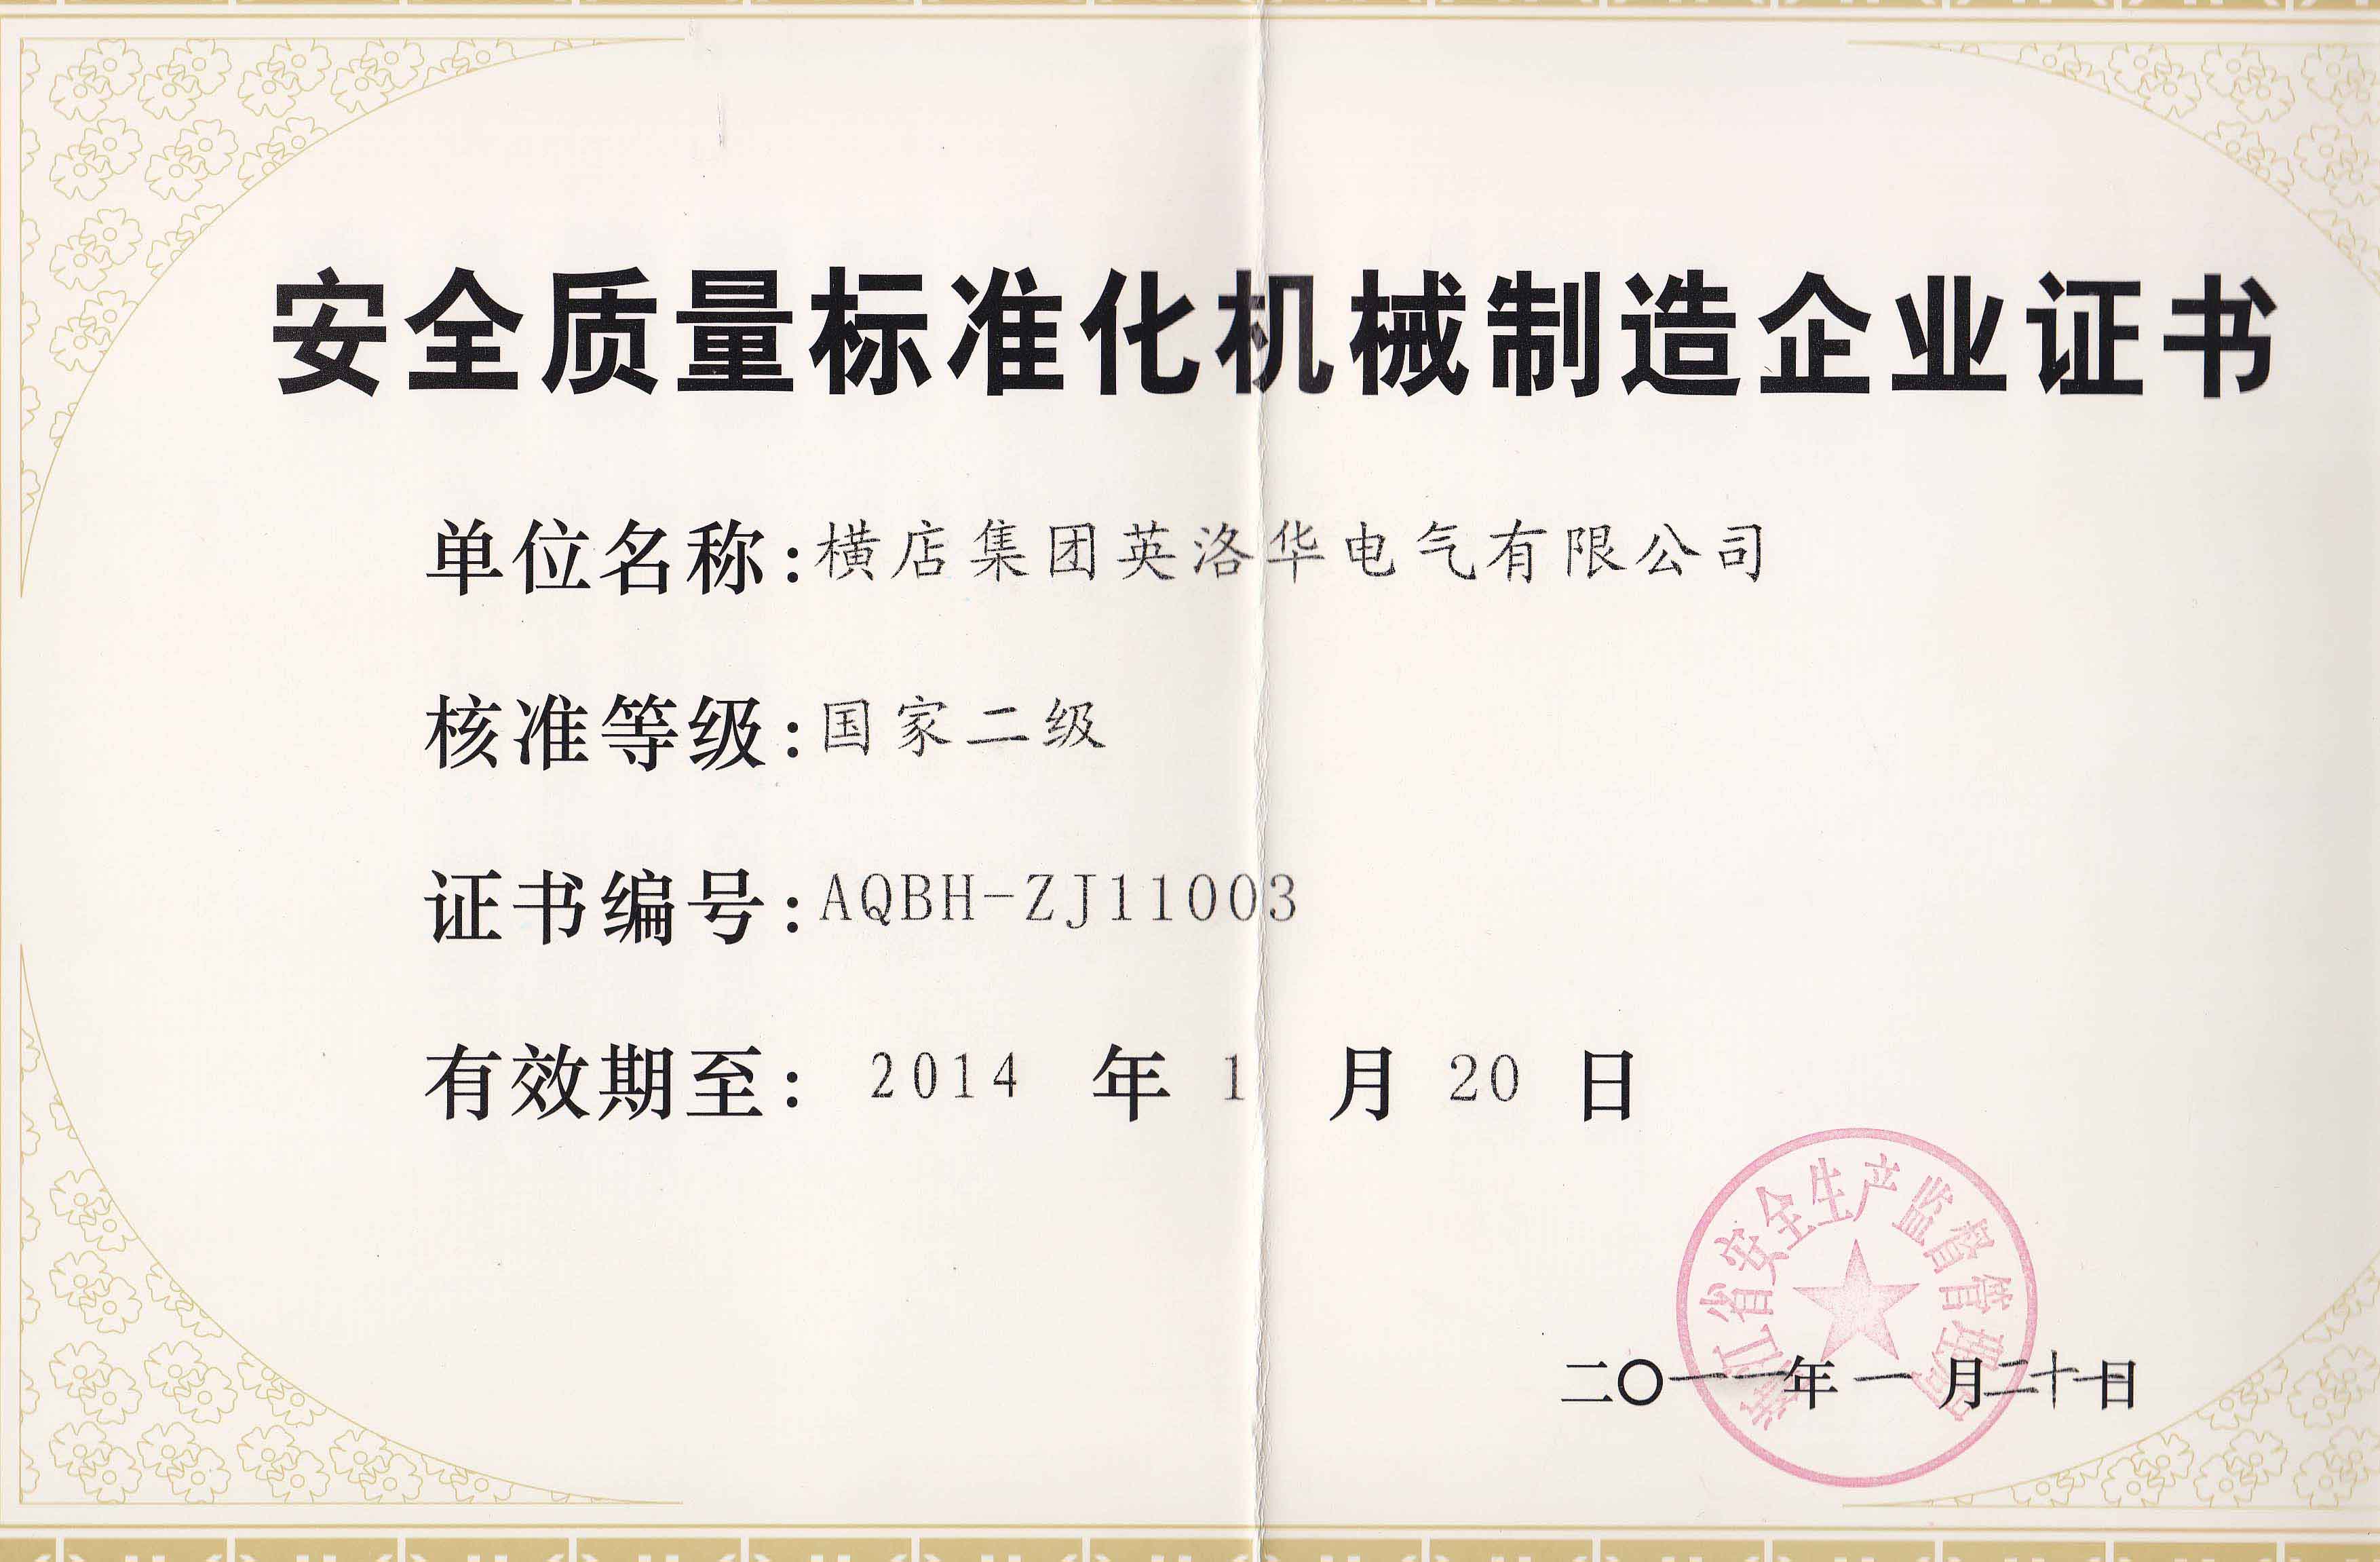 Safety and quality standardization machinery manufacturing enterprise certificate